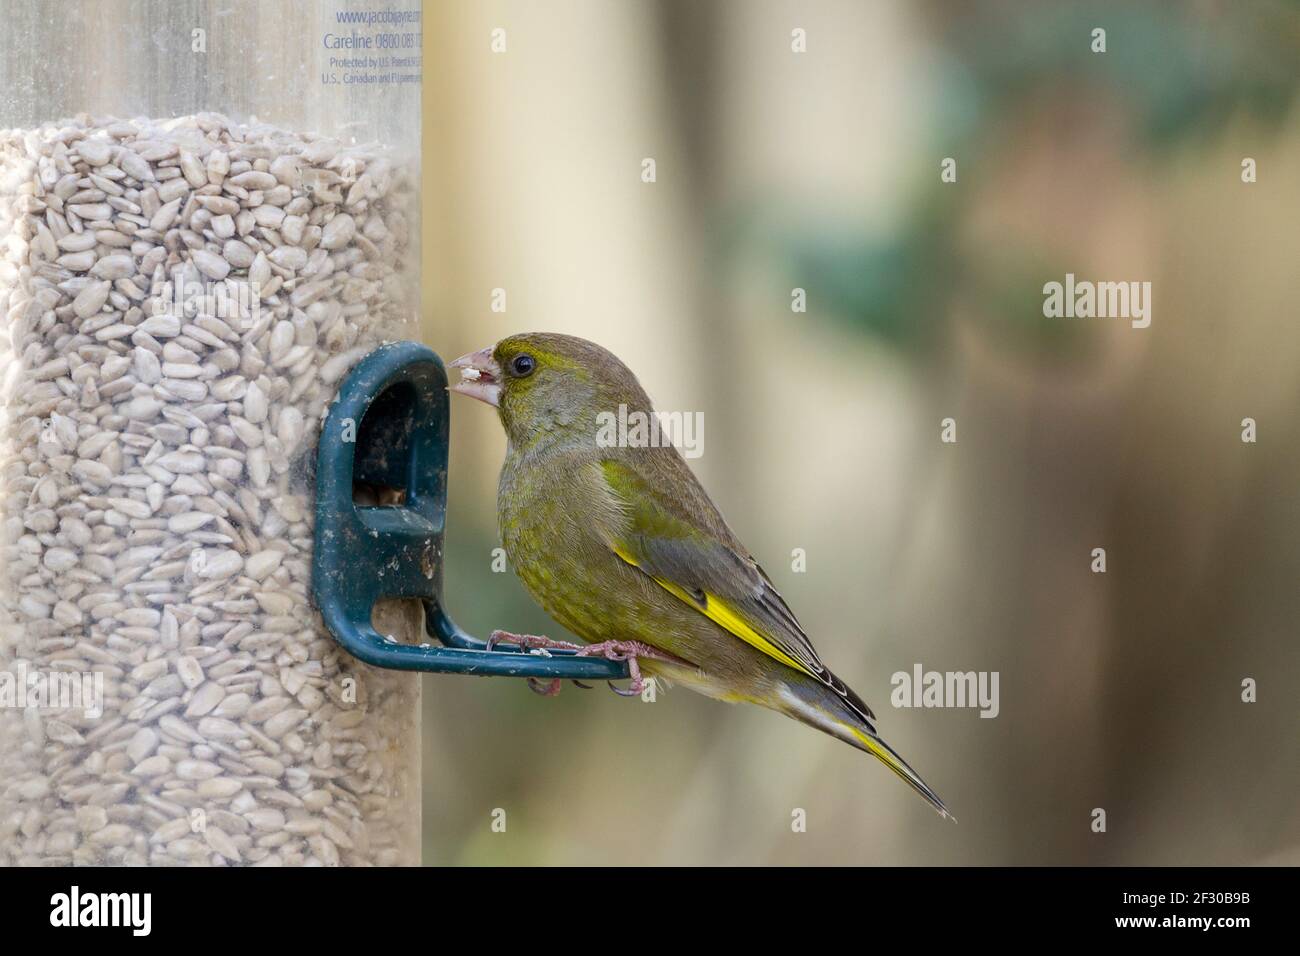 Greenfinch (carduelis chloris) on sunflower seed feeder dull grey green with bright yellow flashes on tail and wings has pink bill reddish purple legs Stock Photo